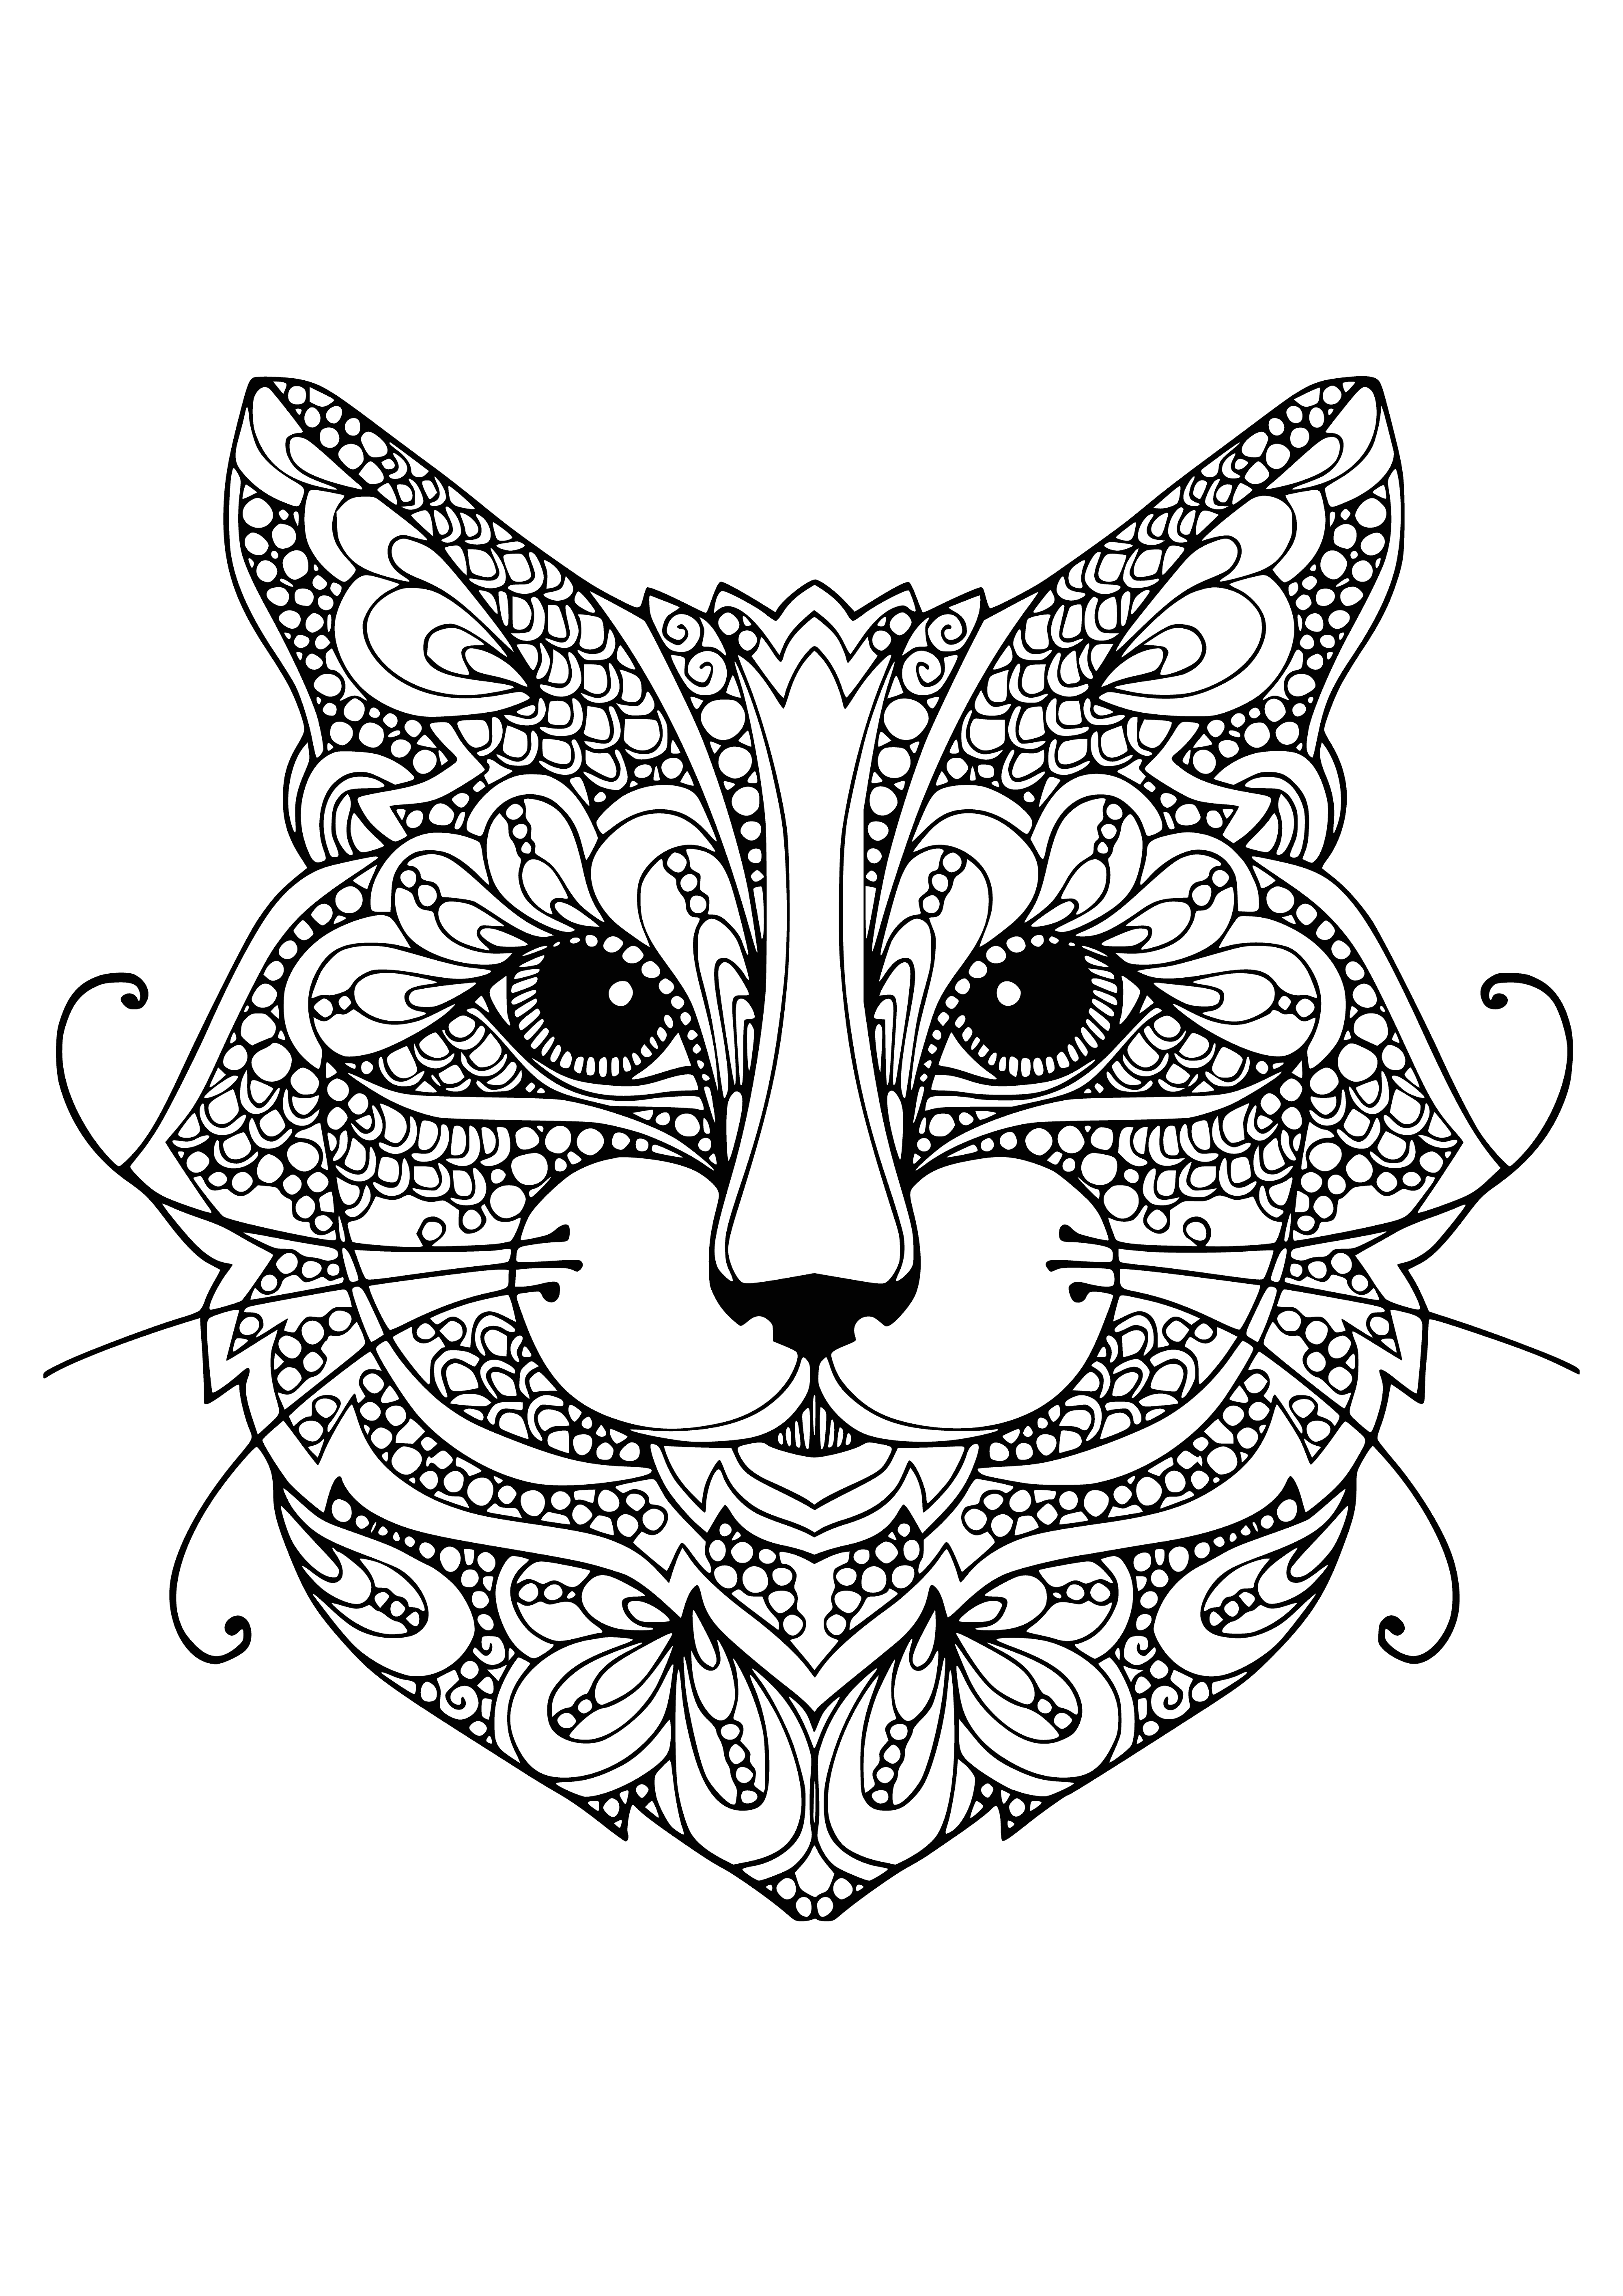 coloring page: Relax and color! Adorable cats in different settings await. For cat lovers of all ages. Enjoy a fun, calming coloring experience.